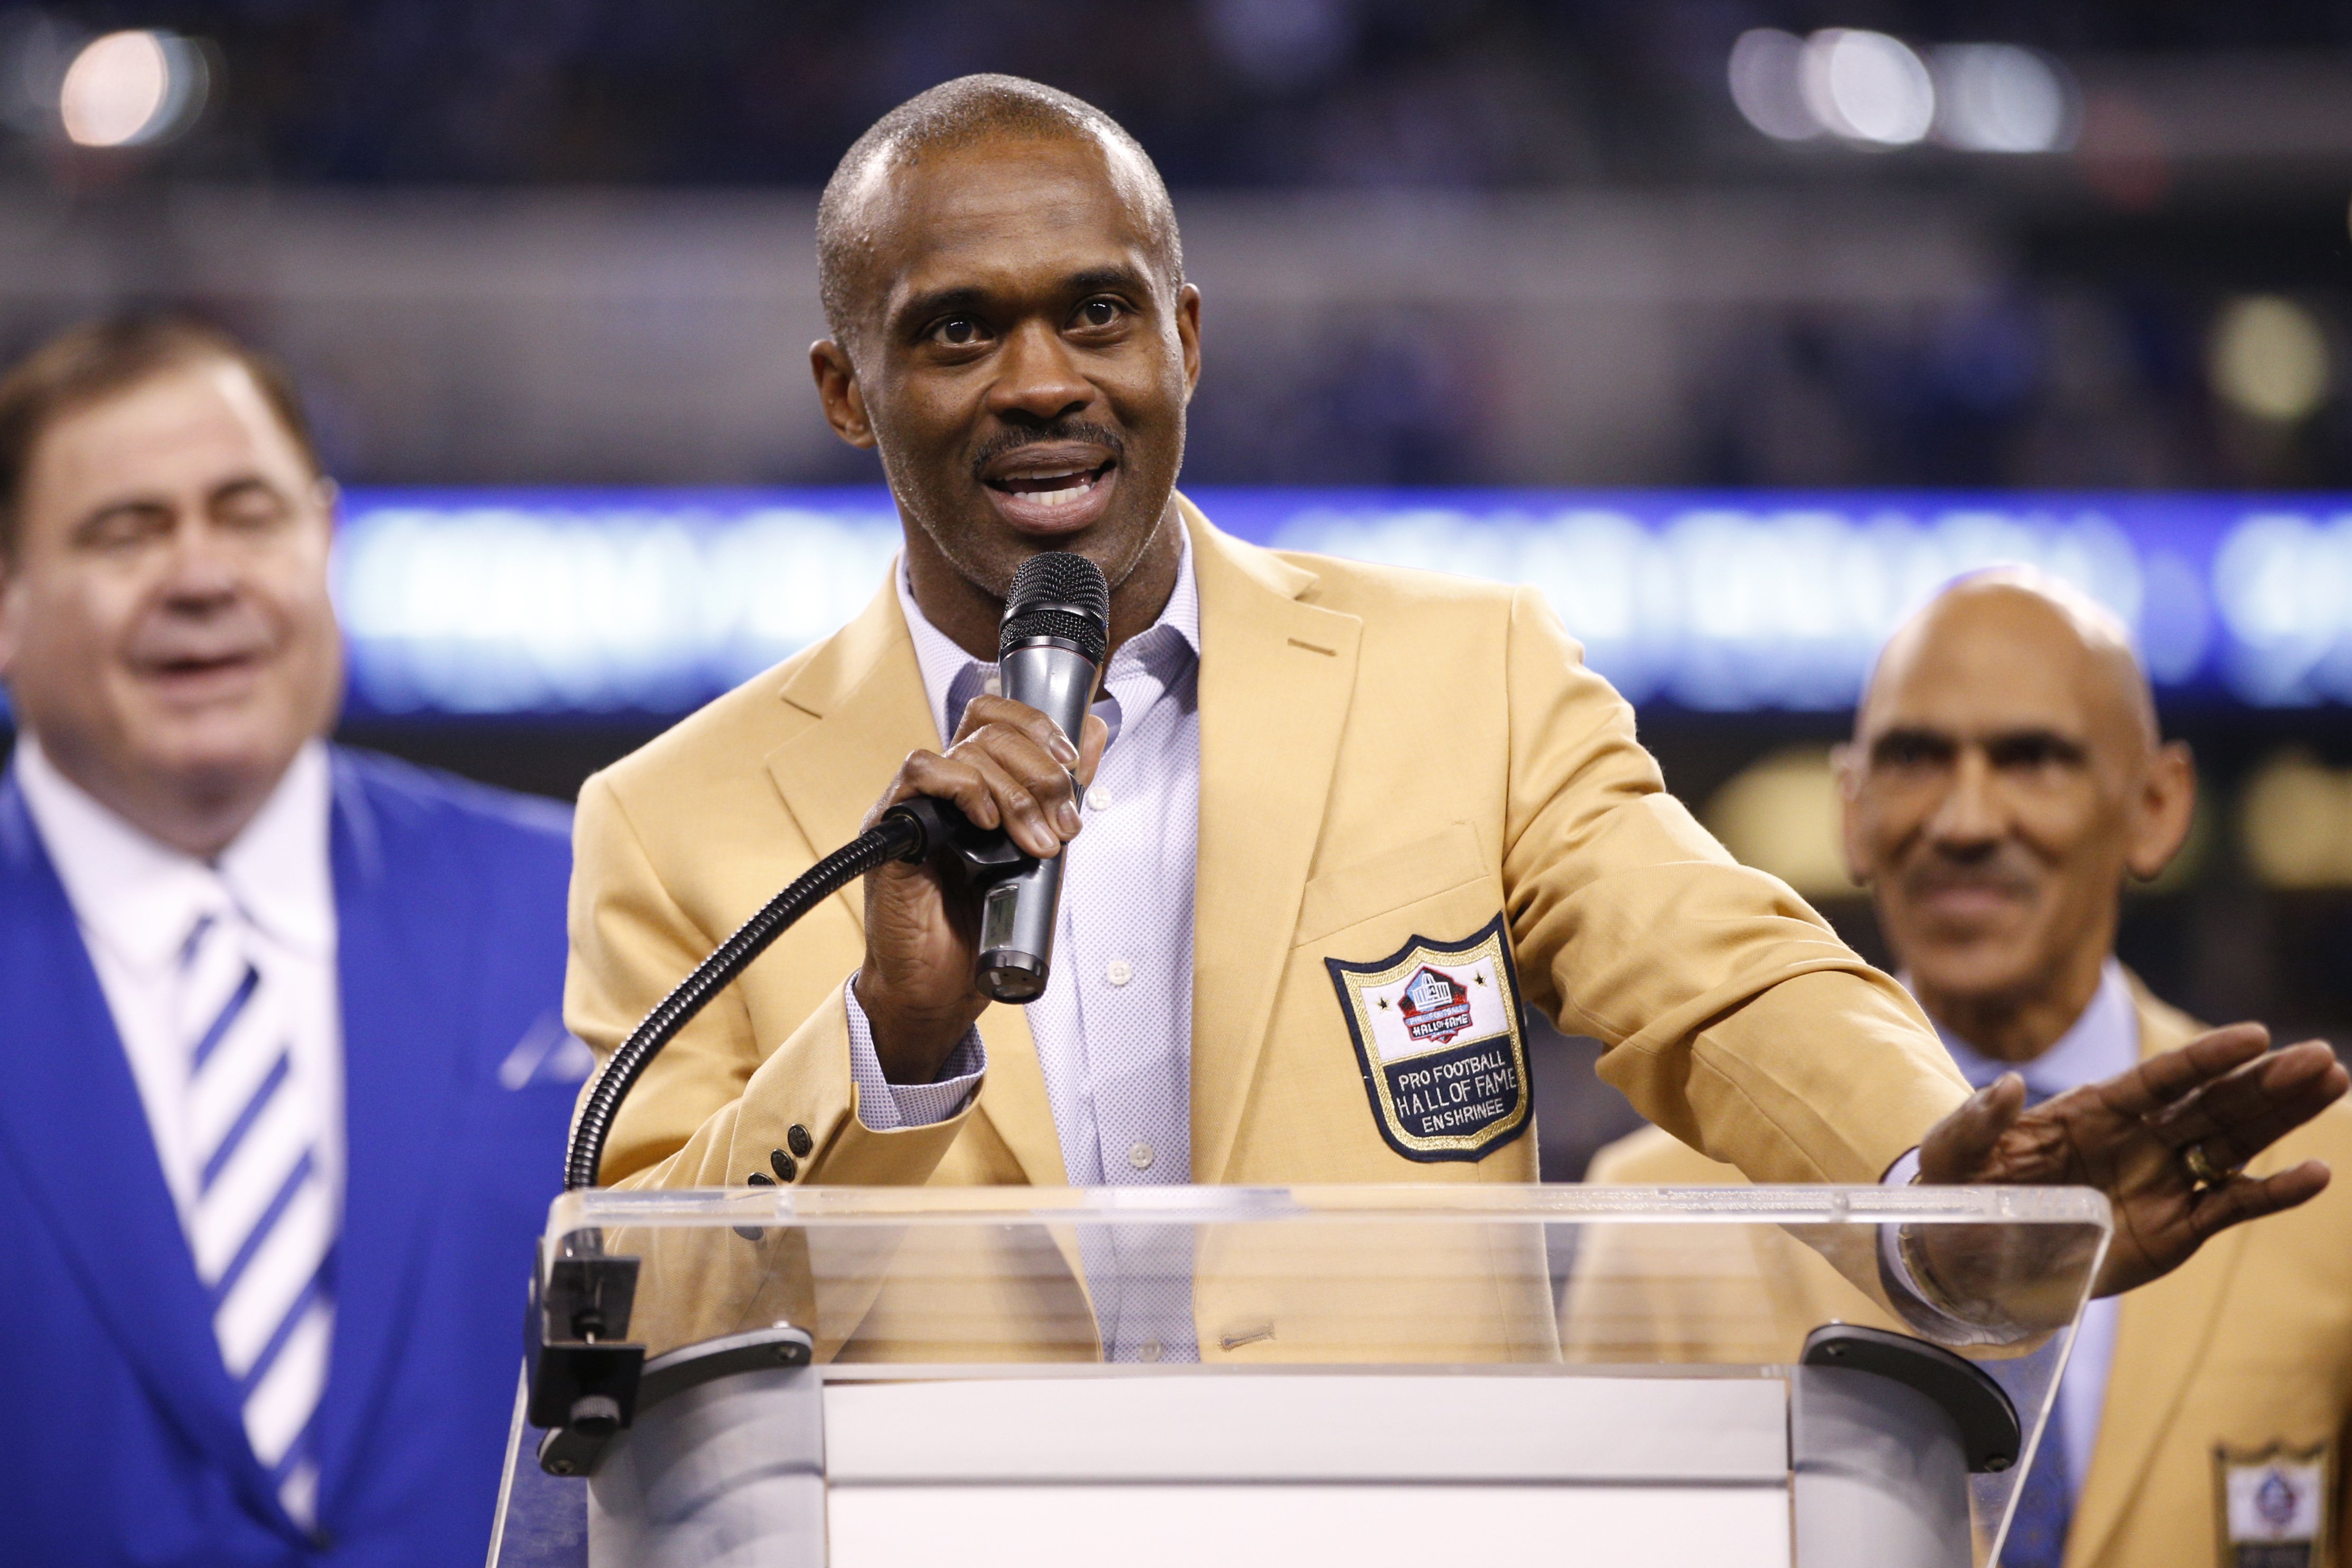 Marvin Harrison speaks during a halftime ceremony to present his Pro Football Hall of Fame ring during the game against the Pittsburgh Steelers at Lucas Oil Stadium on November 24, 2016 in Indianapolis, Indiana | Photo: GettyImages